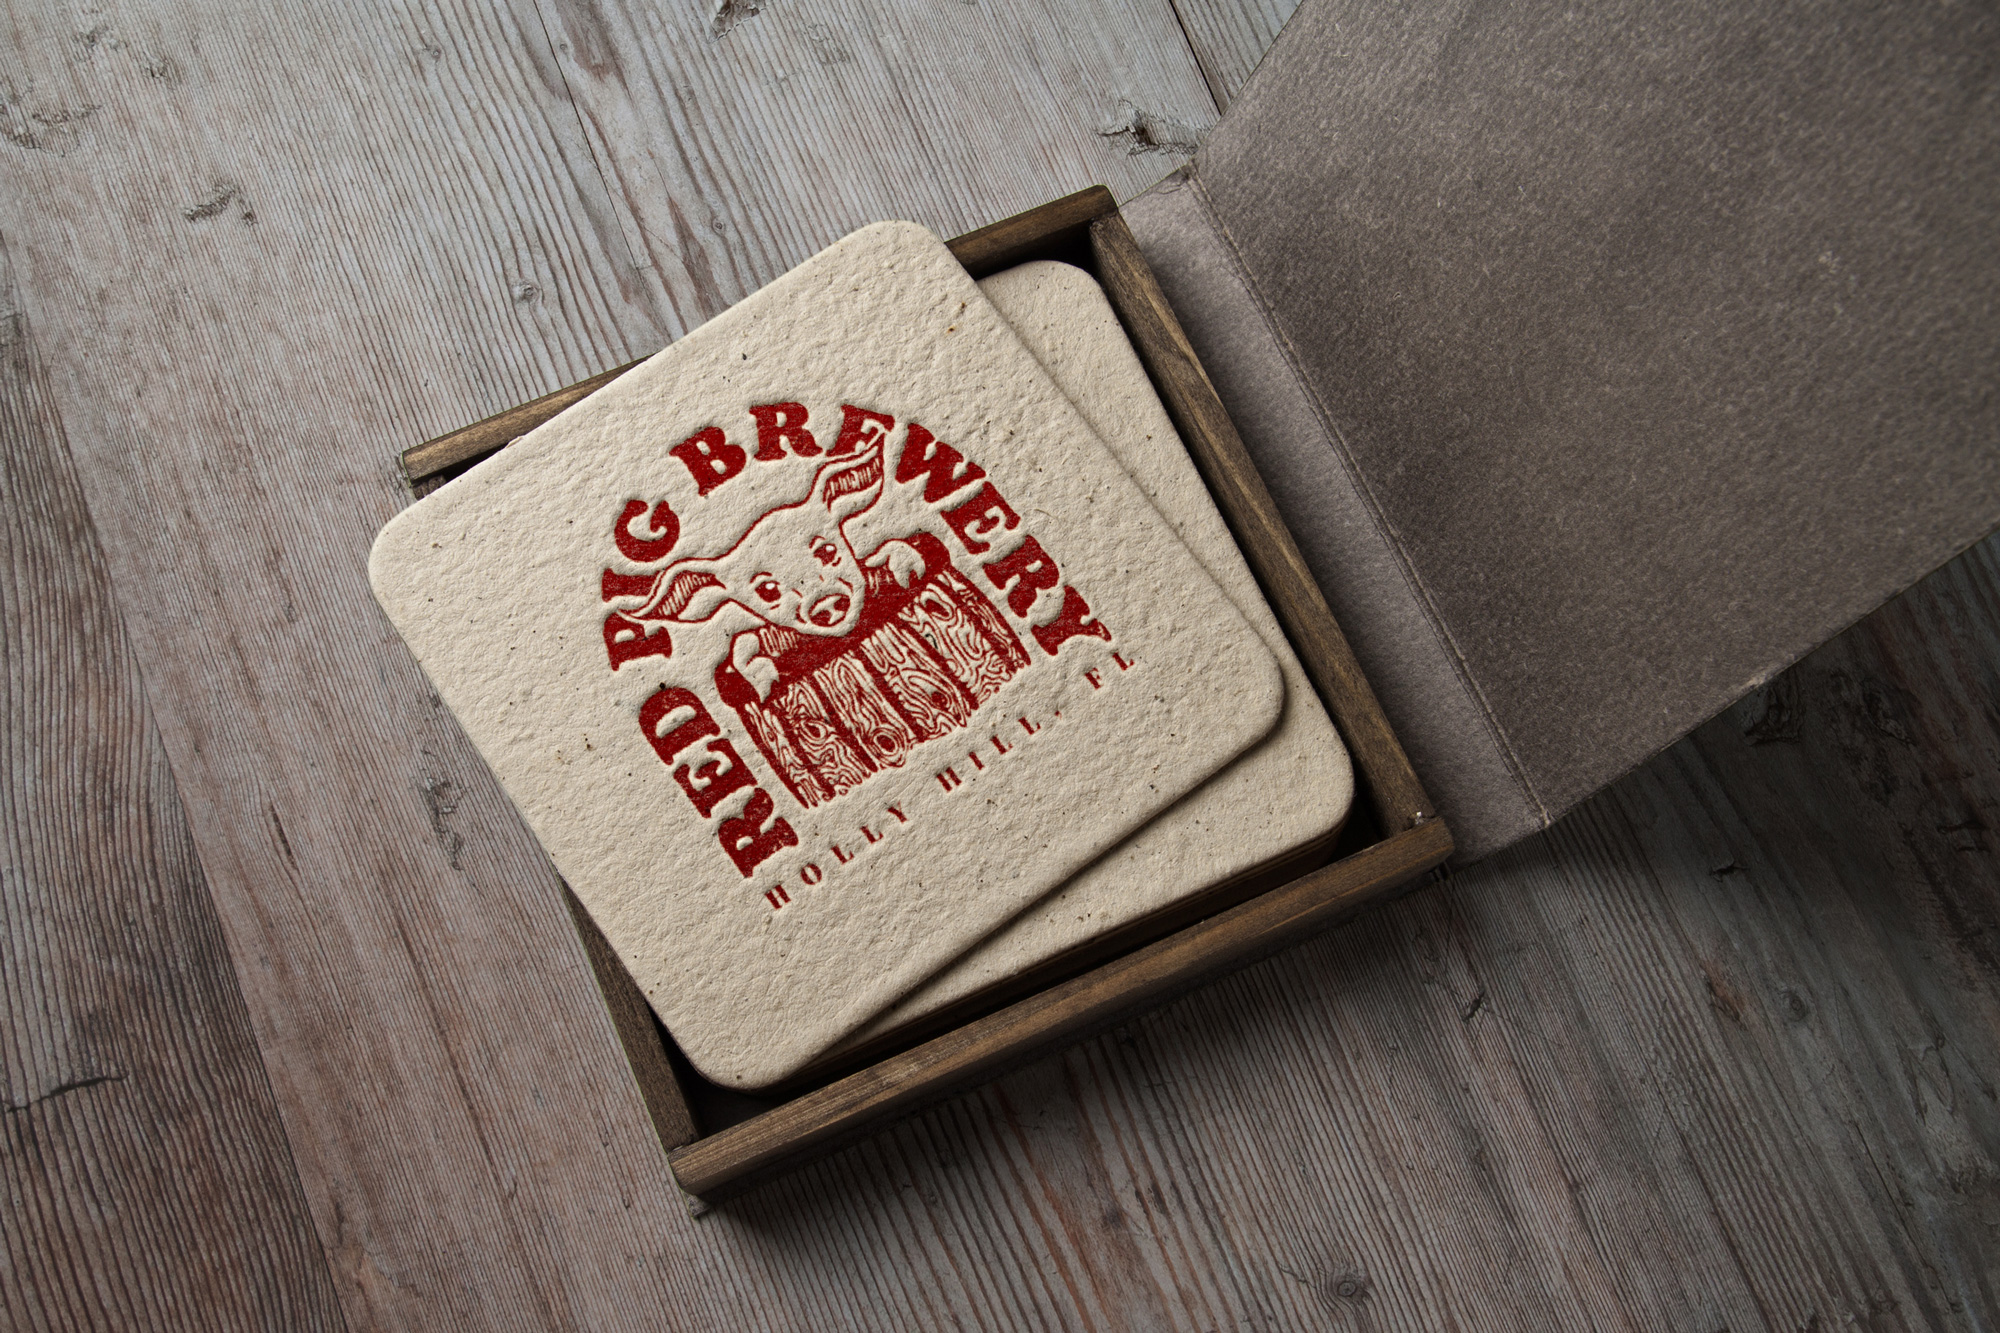 nice coasters with red pig brewery logo